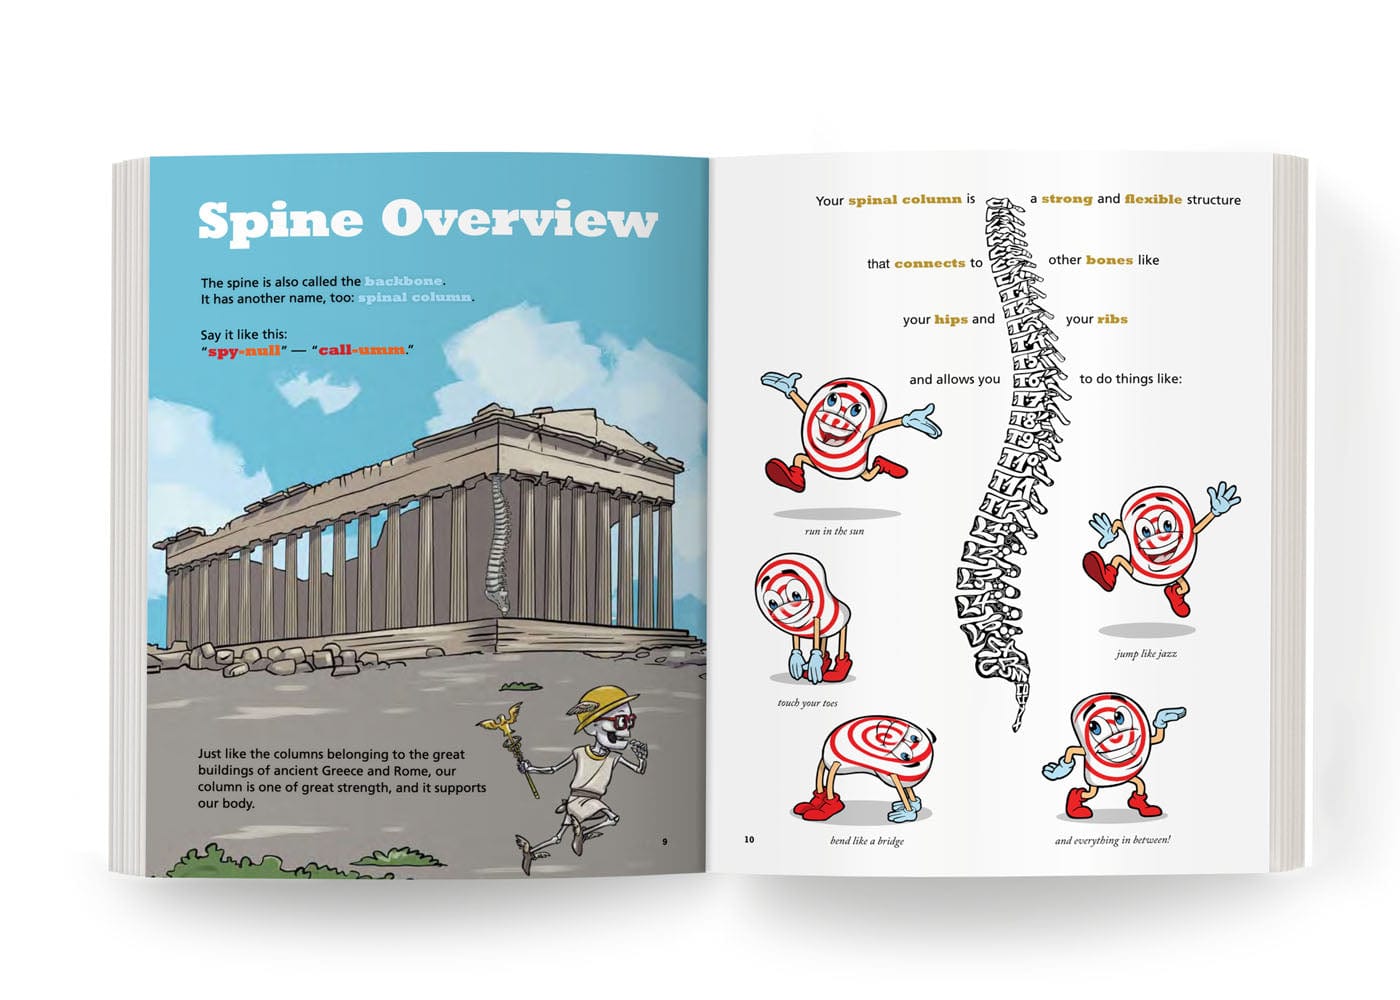 Bones of the Rib Cage and Spine: Book 3 Health Education for Children